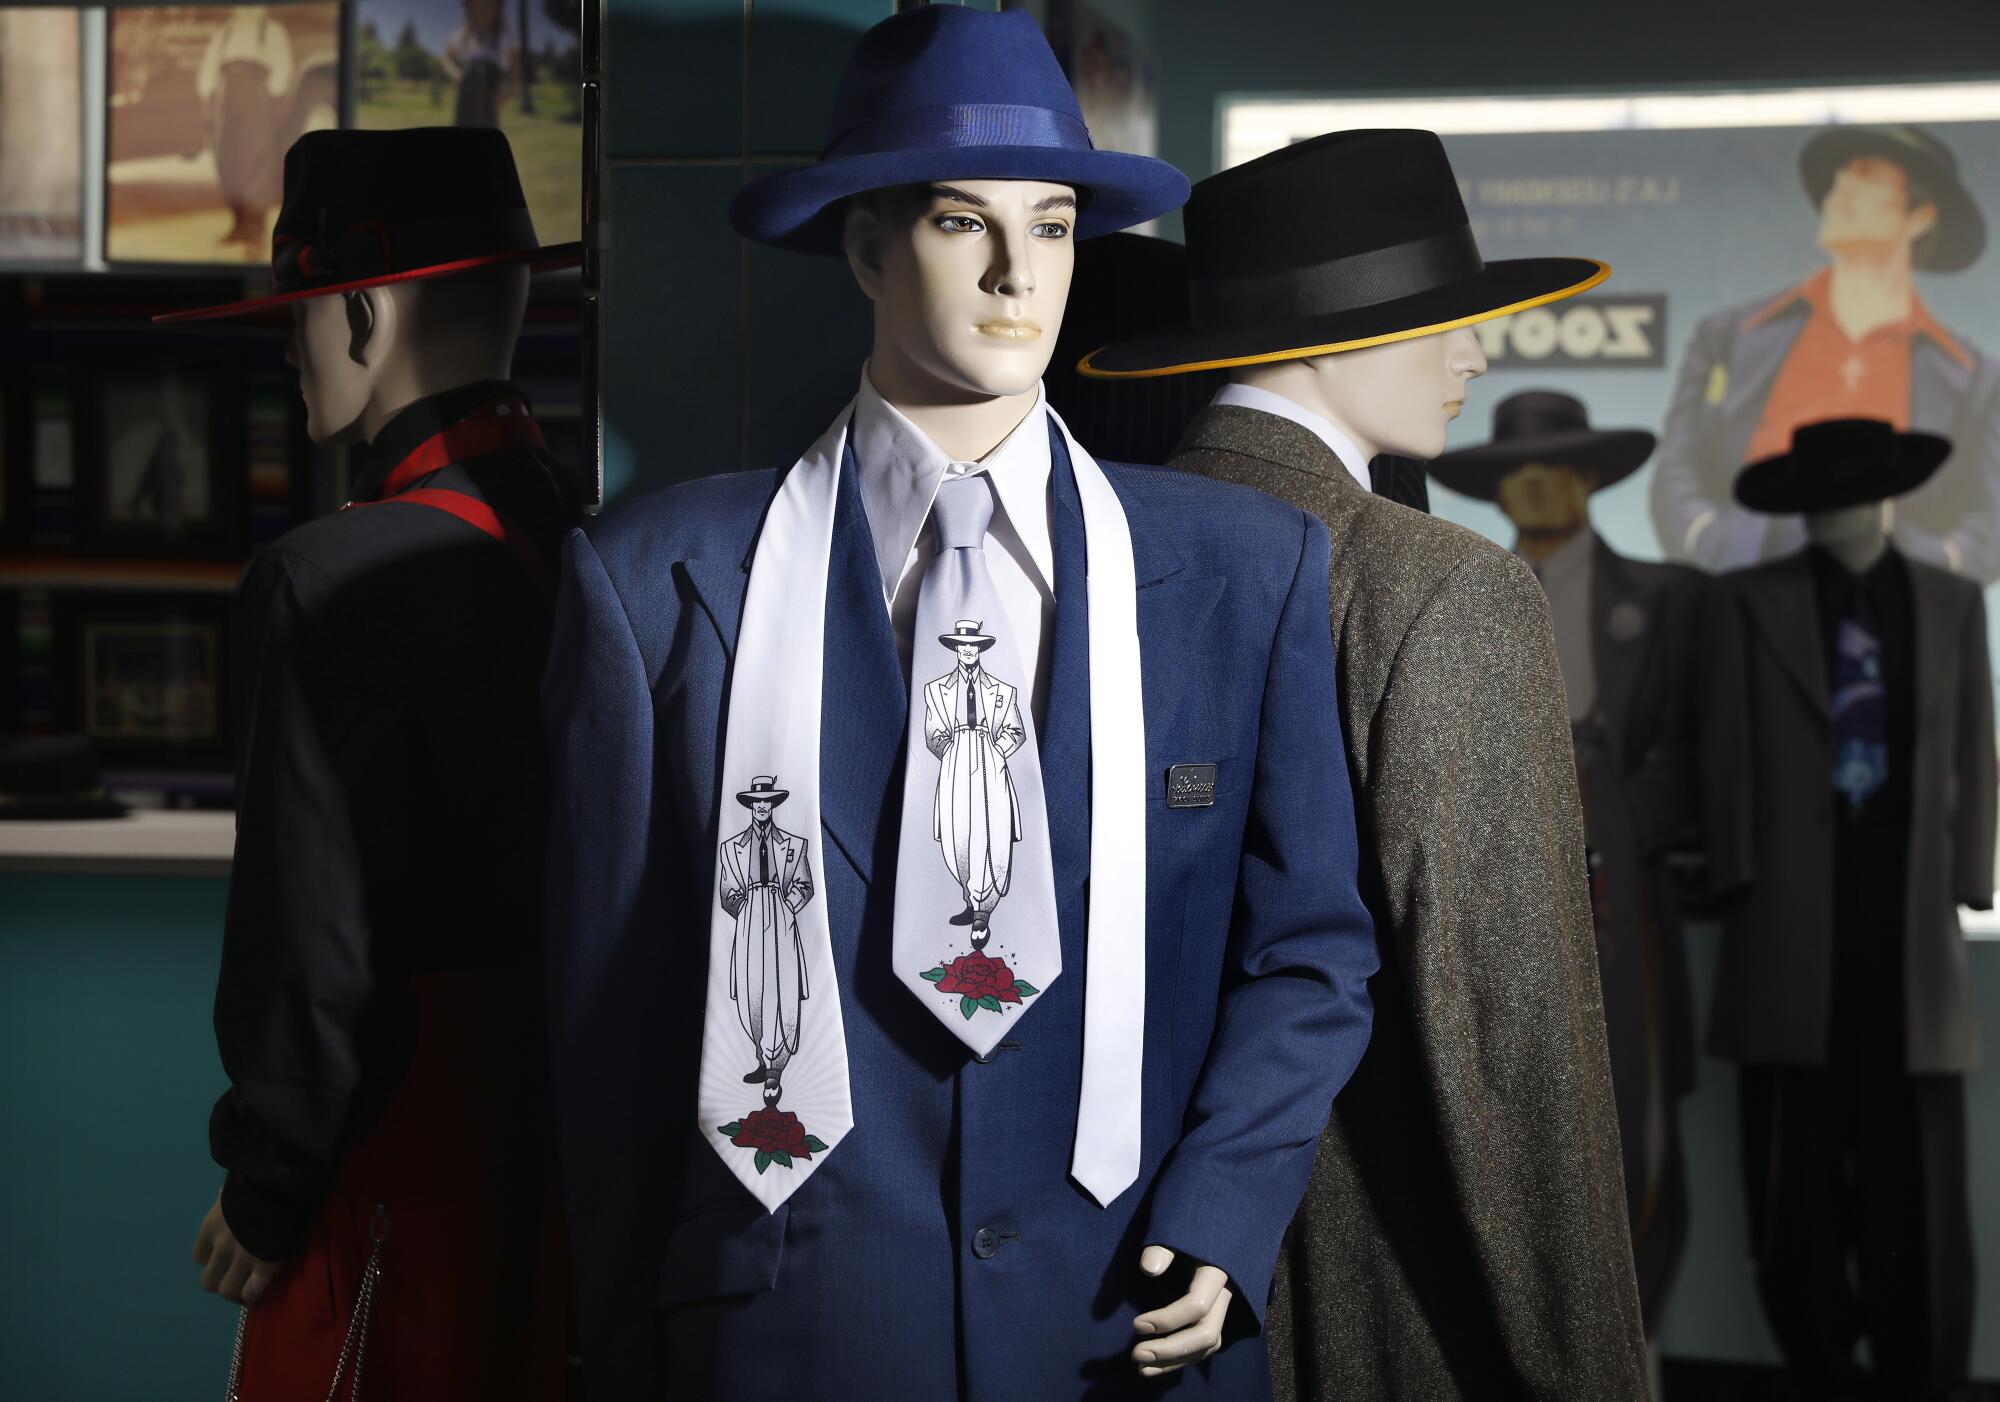 A Cultural History of the Zoot Suit